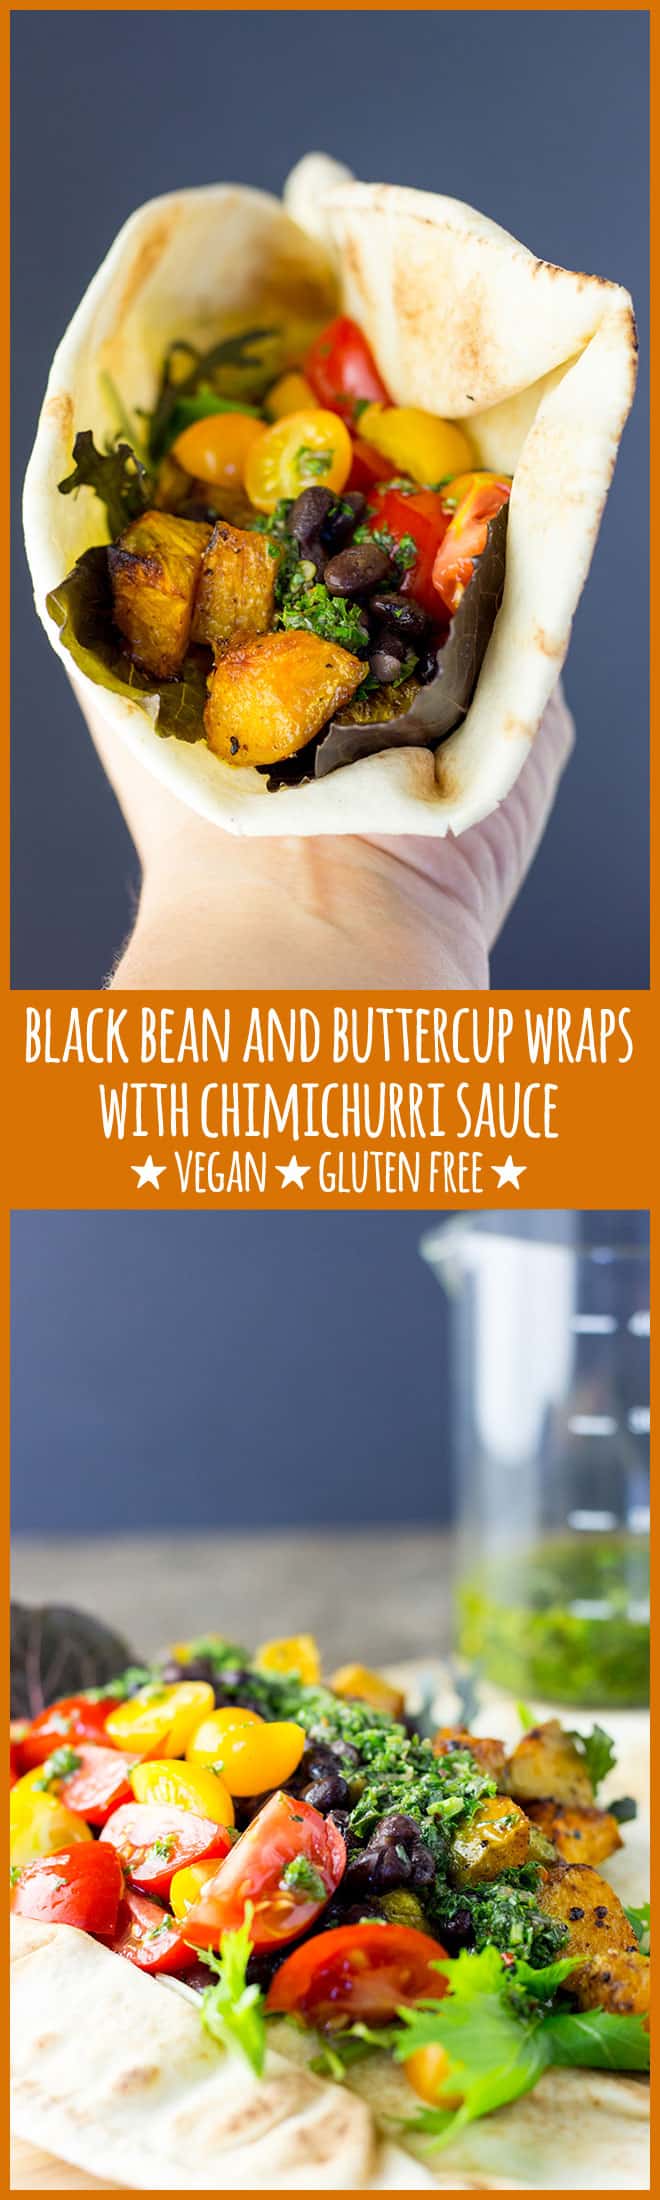 Black bean and buttercup wraps with chimichurri sauce. 